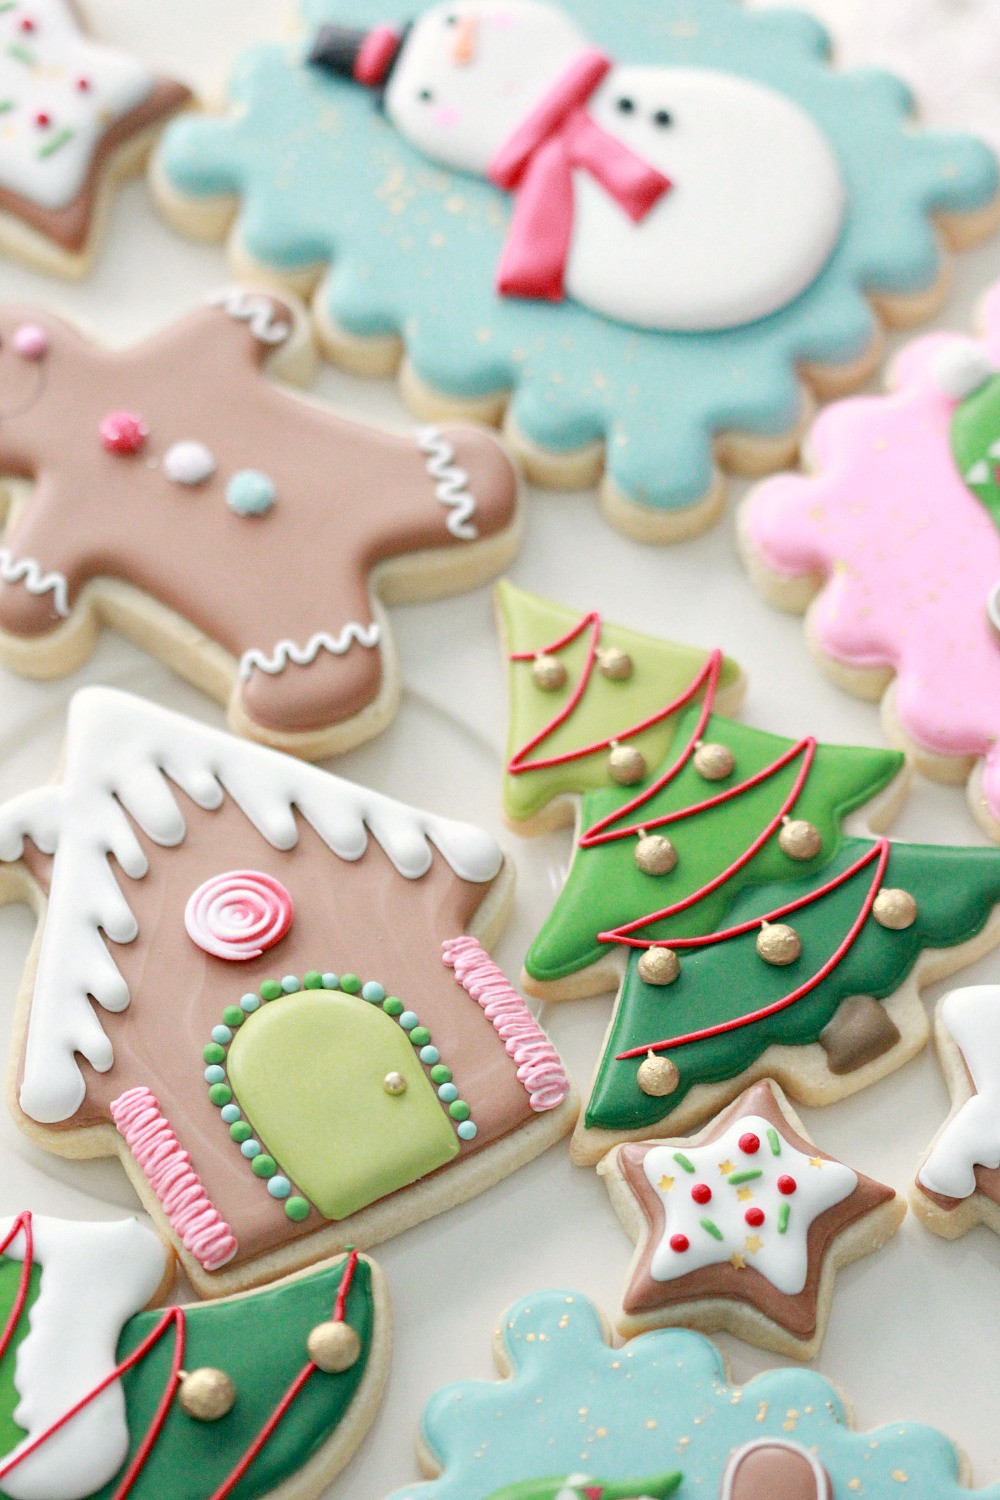 Royal Icing Cookies Recipe
 Royal Icing Cookie Decorating Tips